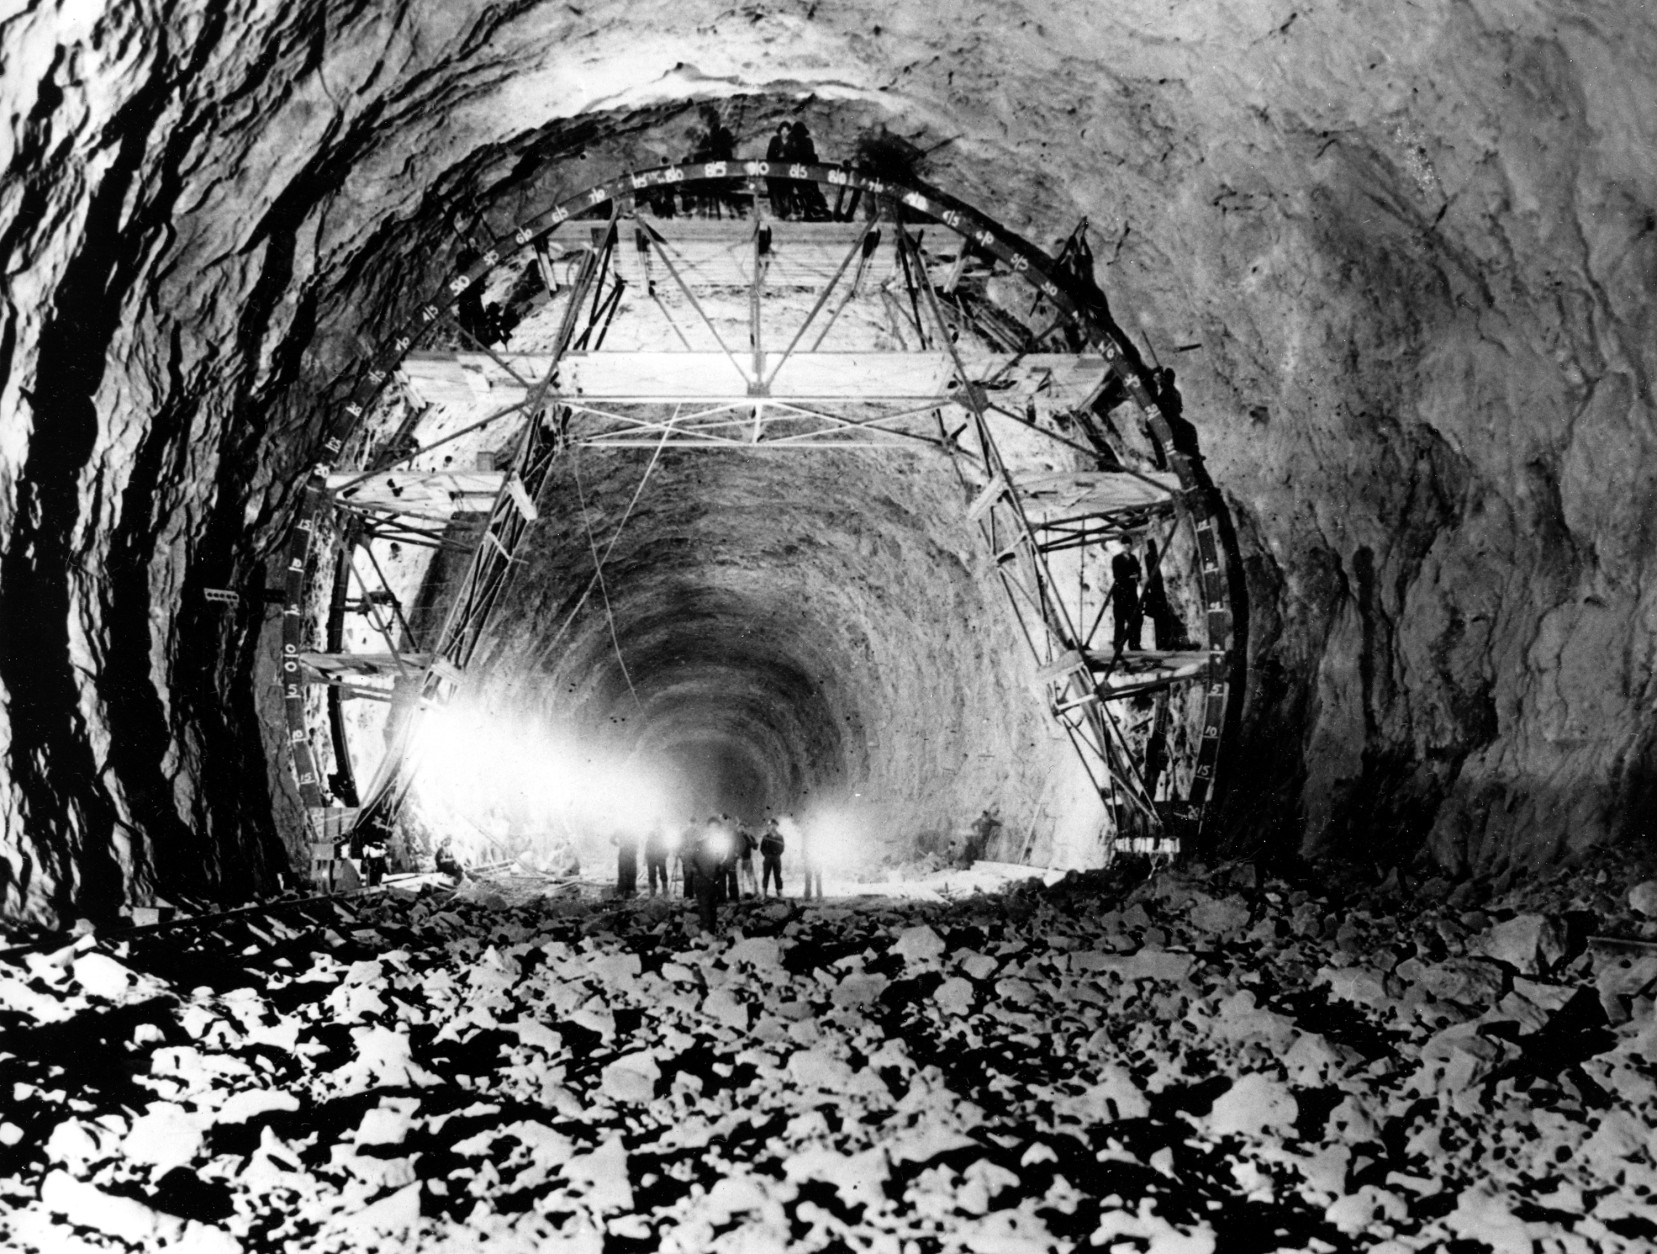 On this date in 1936, Boulder Dam (now Hoover Dam) began operation as President Franklin D. Roosevelt pressed a key in Washington to signal the startup of the dam's first hydroelectric generator. This view shows the interior of one of the tunnels through which the Colorado River would be diverted around the Hoover Dam site in Boulder City, Nev., April 18, 1932.  (AP Photo)